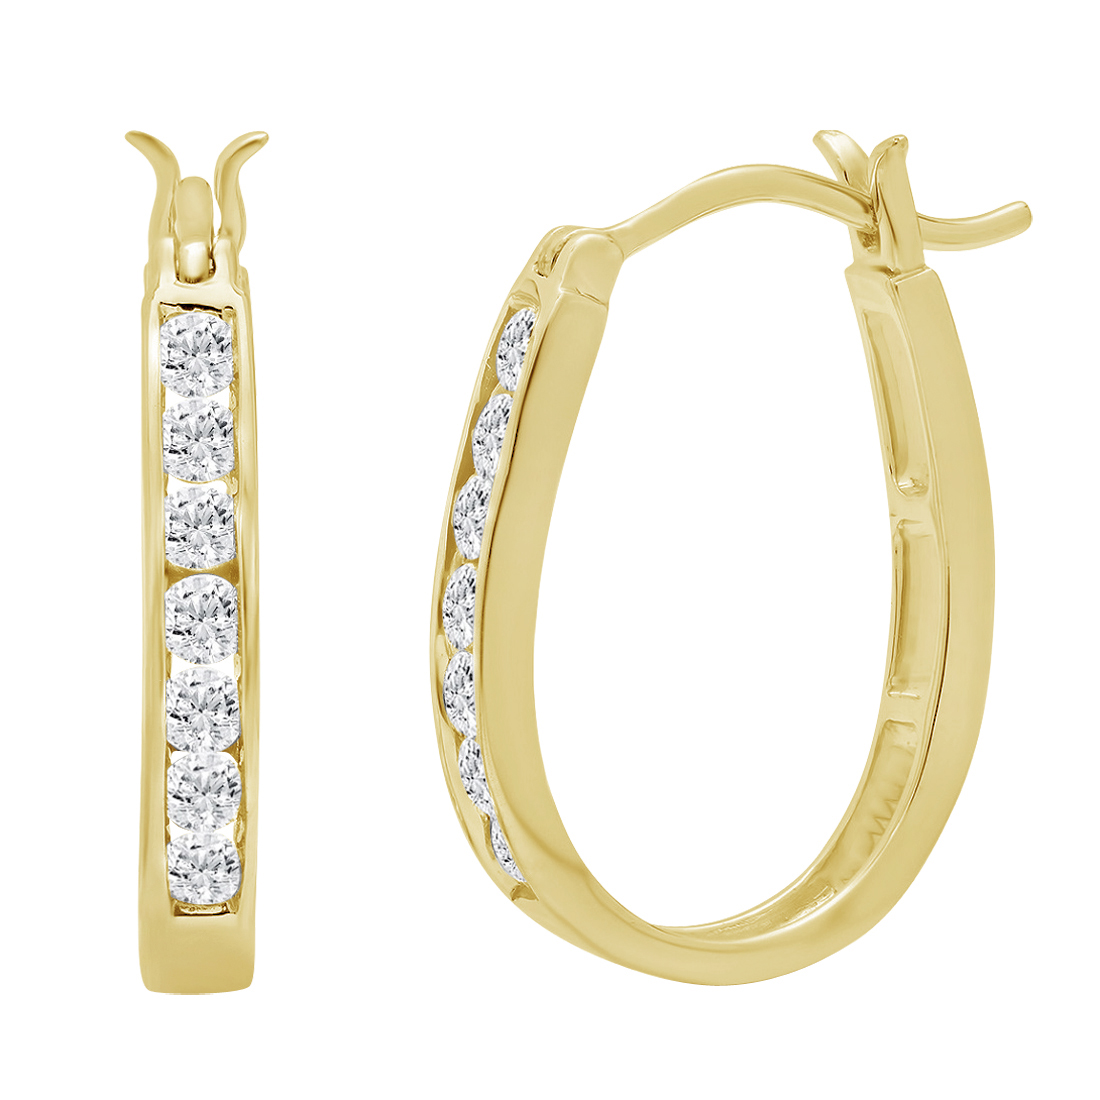 Amanda Rose 1/2ct TW Oval Shaped Hoop Diamond Hoop Earrings for Women Crafted in 10K White Gold or 10K Yellow Gold